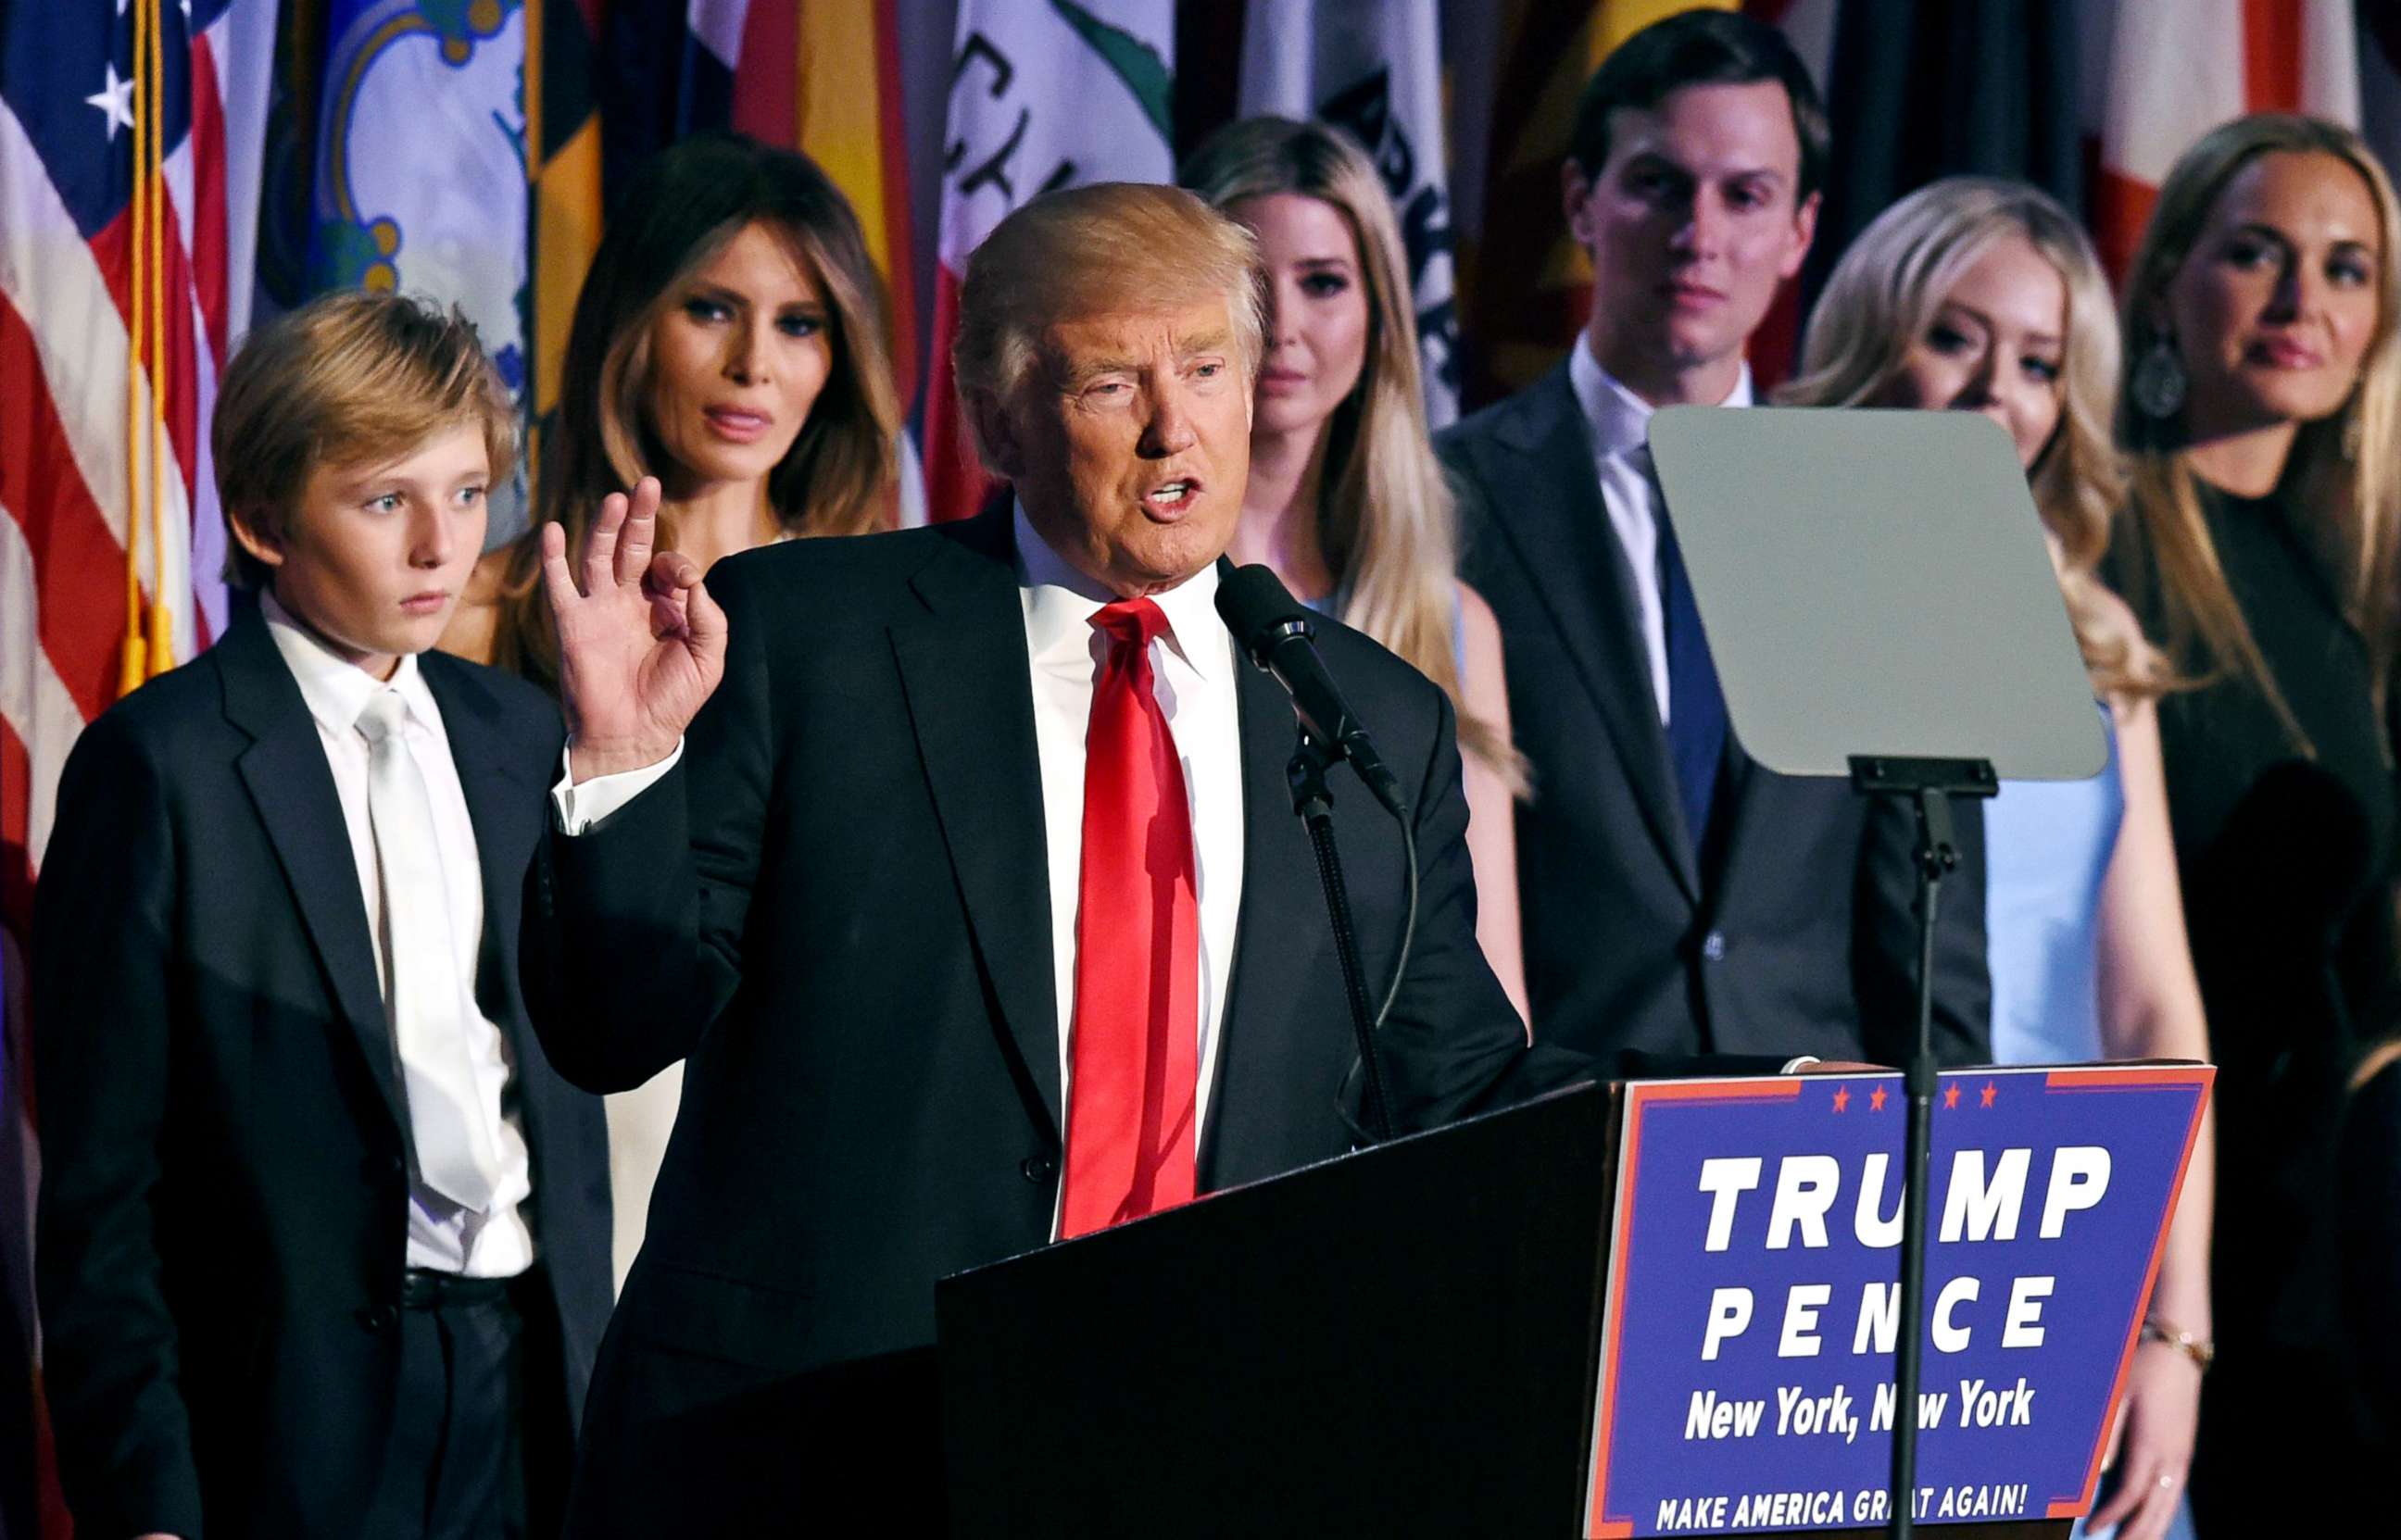 PHOTO: President-elect Donald Trump arrives on stage with his family to speak to supporters on election night in New York, Nov. 9, 2016.